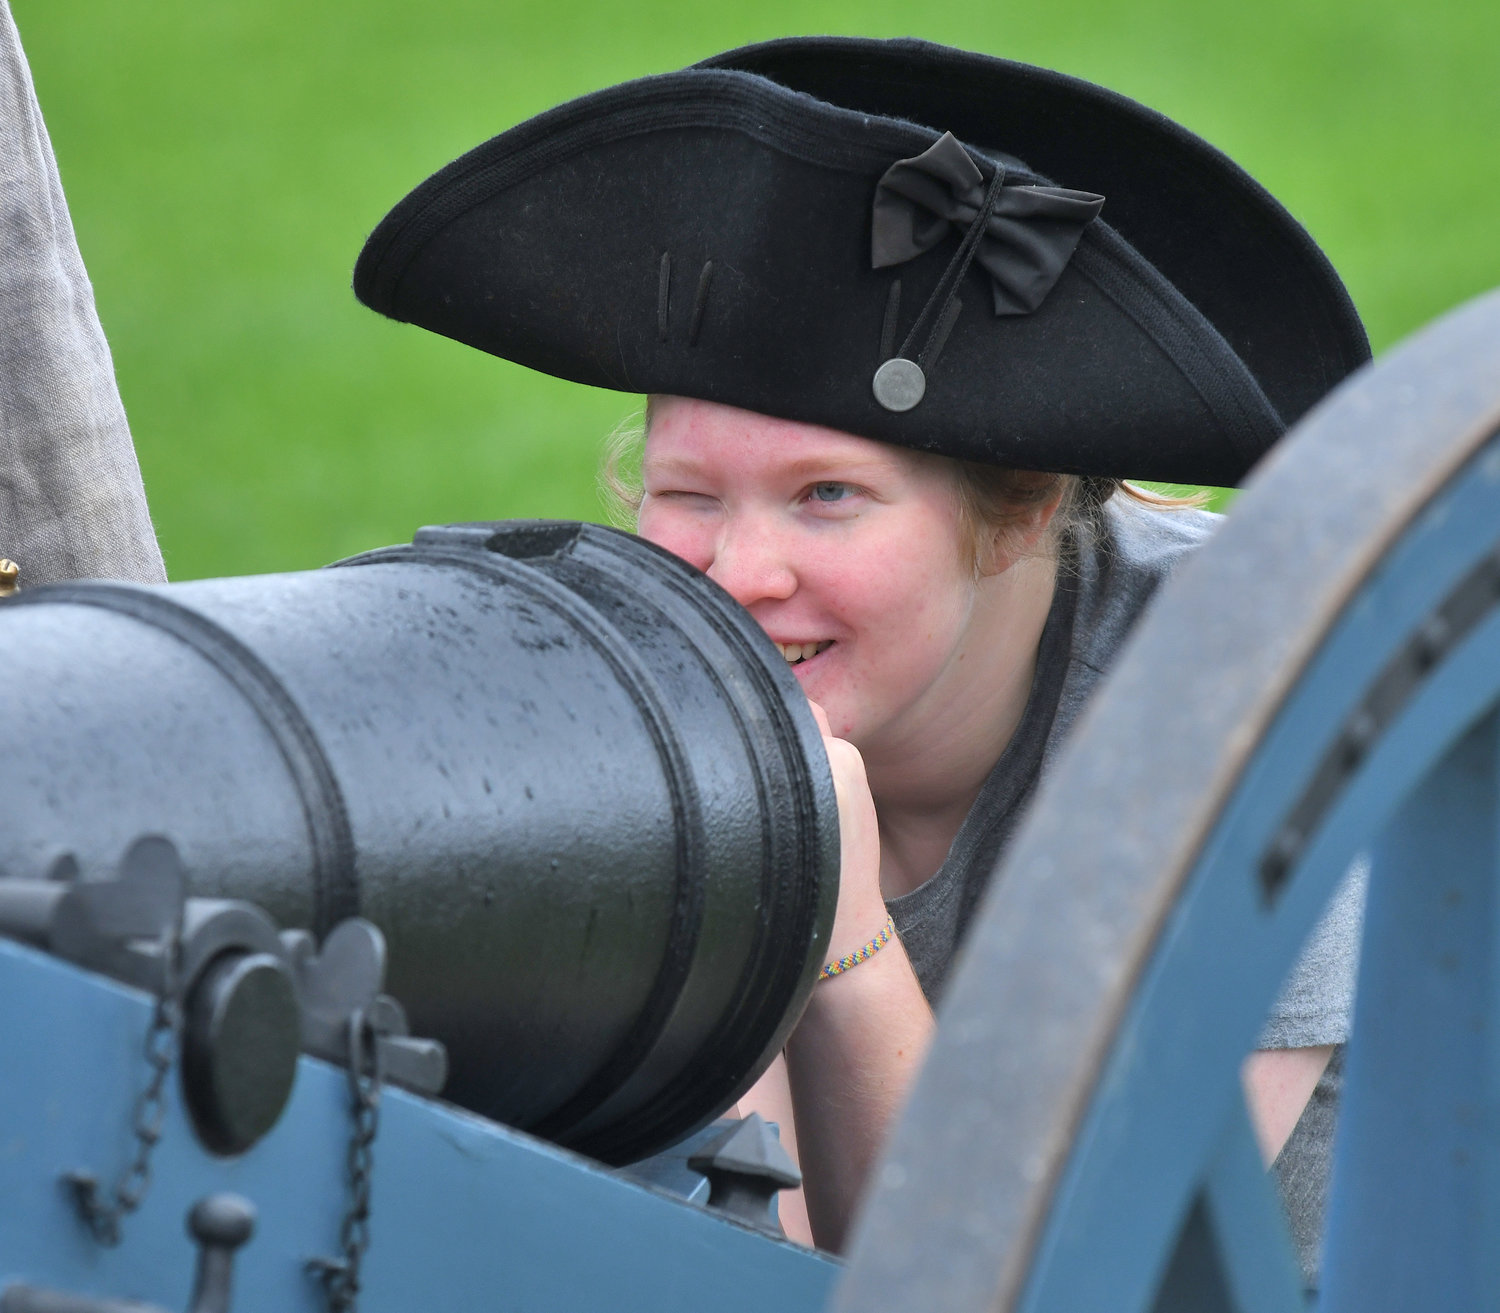 Grace Logue, 16, takes aim during a cannon demonstration Wednesday at Fort Stanwix in Rome. A large group of home schooled children visited the fort all day.